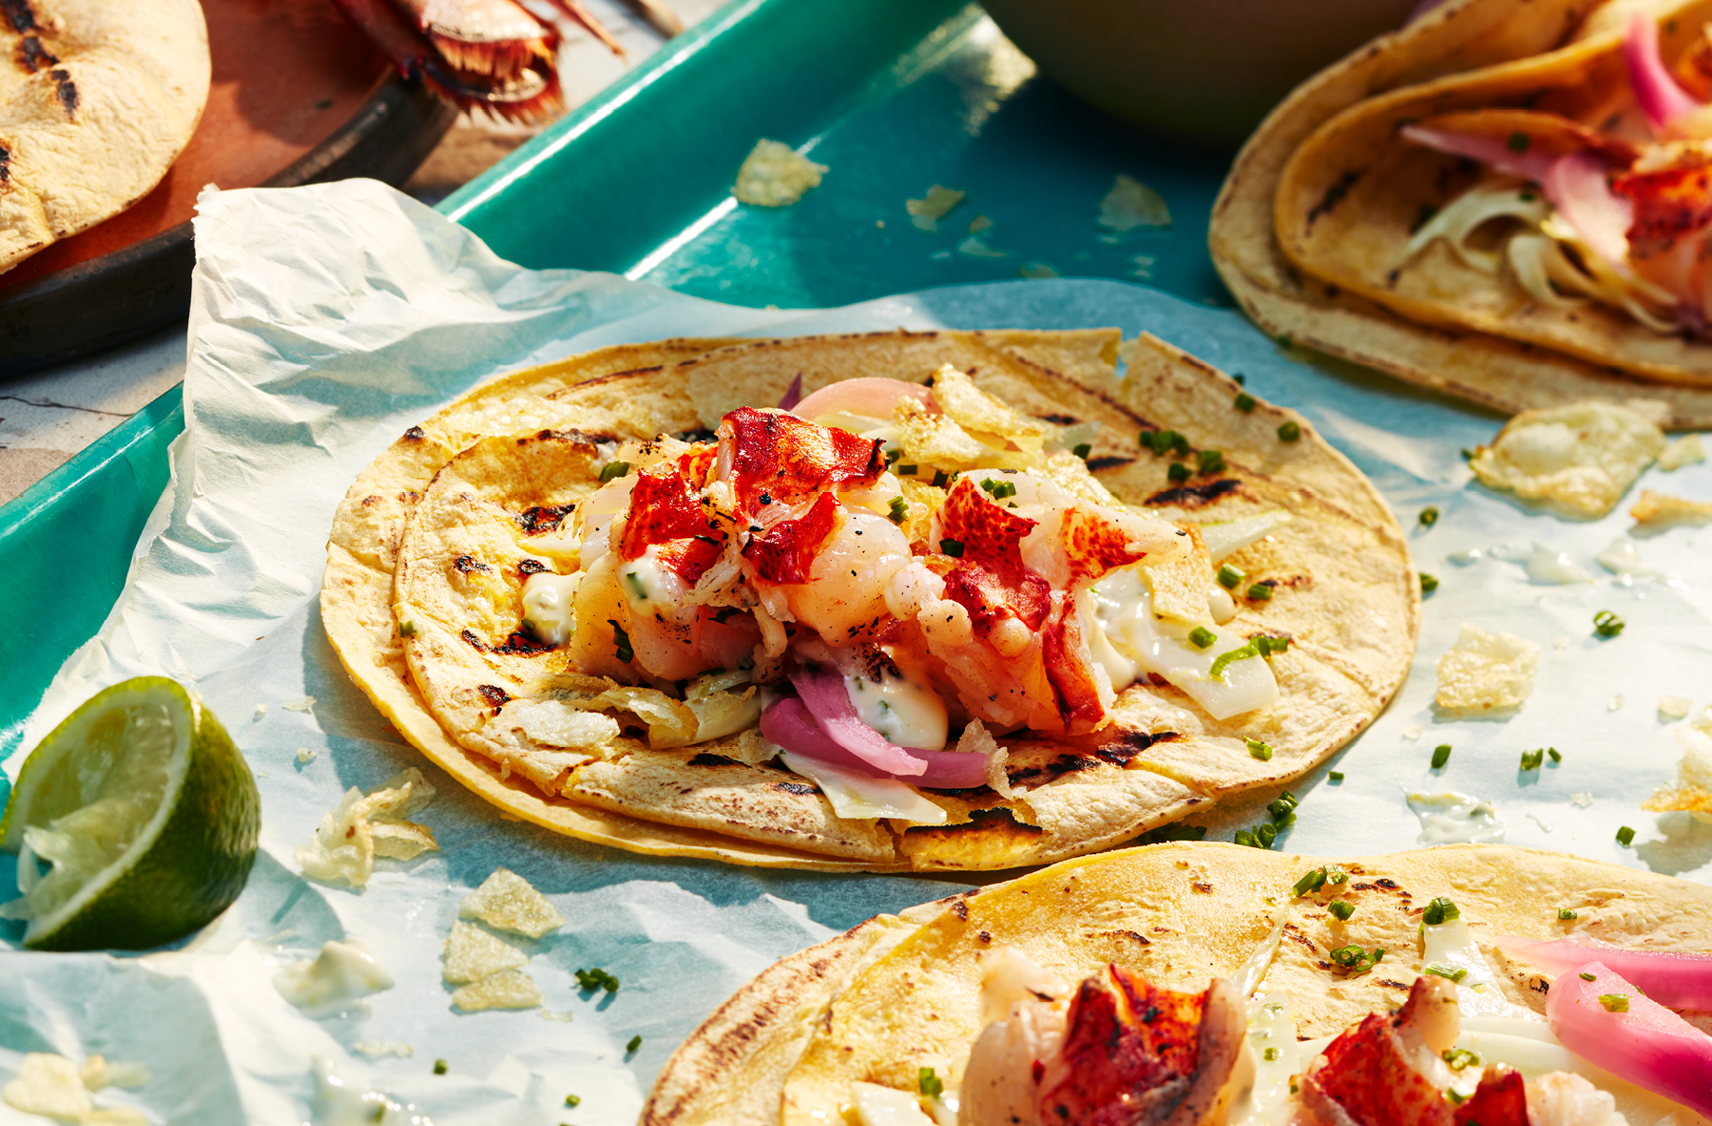 A tray with several tortillas that have PC Lobster Tail Skewers, pickled red onion with a crunchy potato chip topping and herbs.